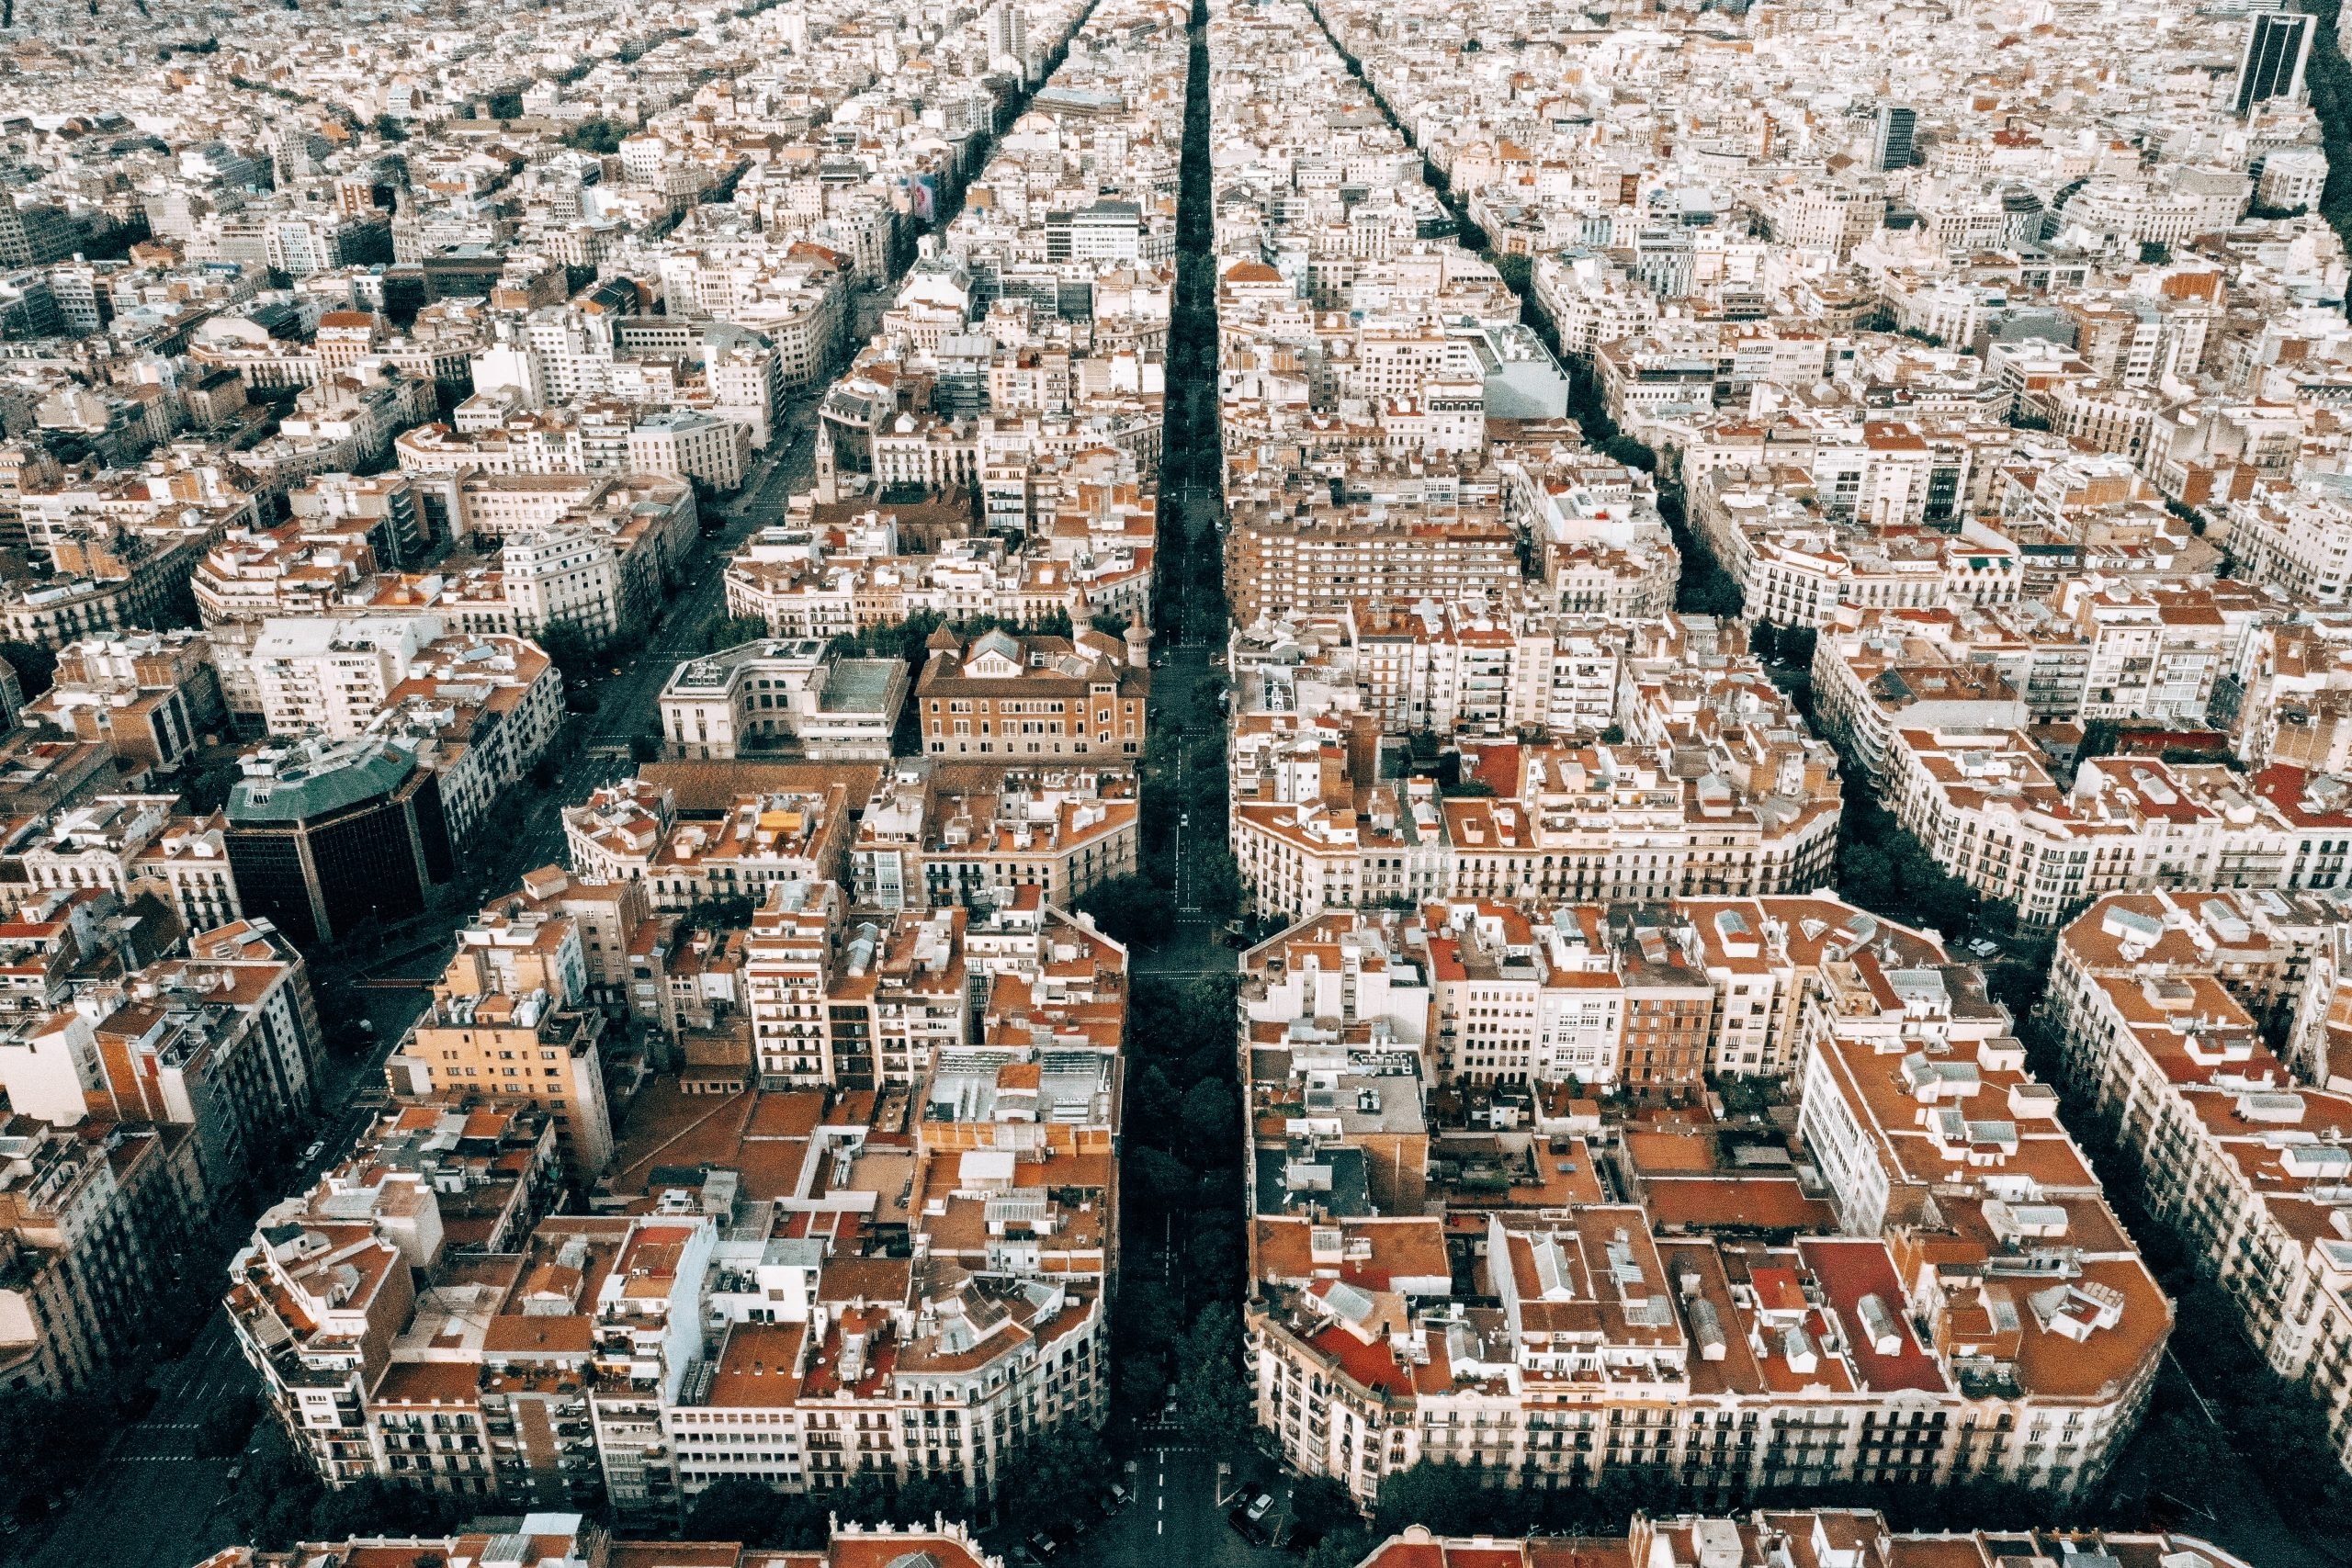 barcelona airport to city, barcelona airport transfers, barcelona airport bus, barcelona airport shuttle, barcelona airport to city center, barcelona airport train, How To Get From Barcelona Airport To City Center